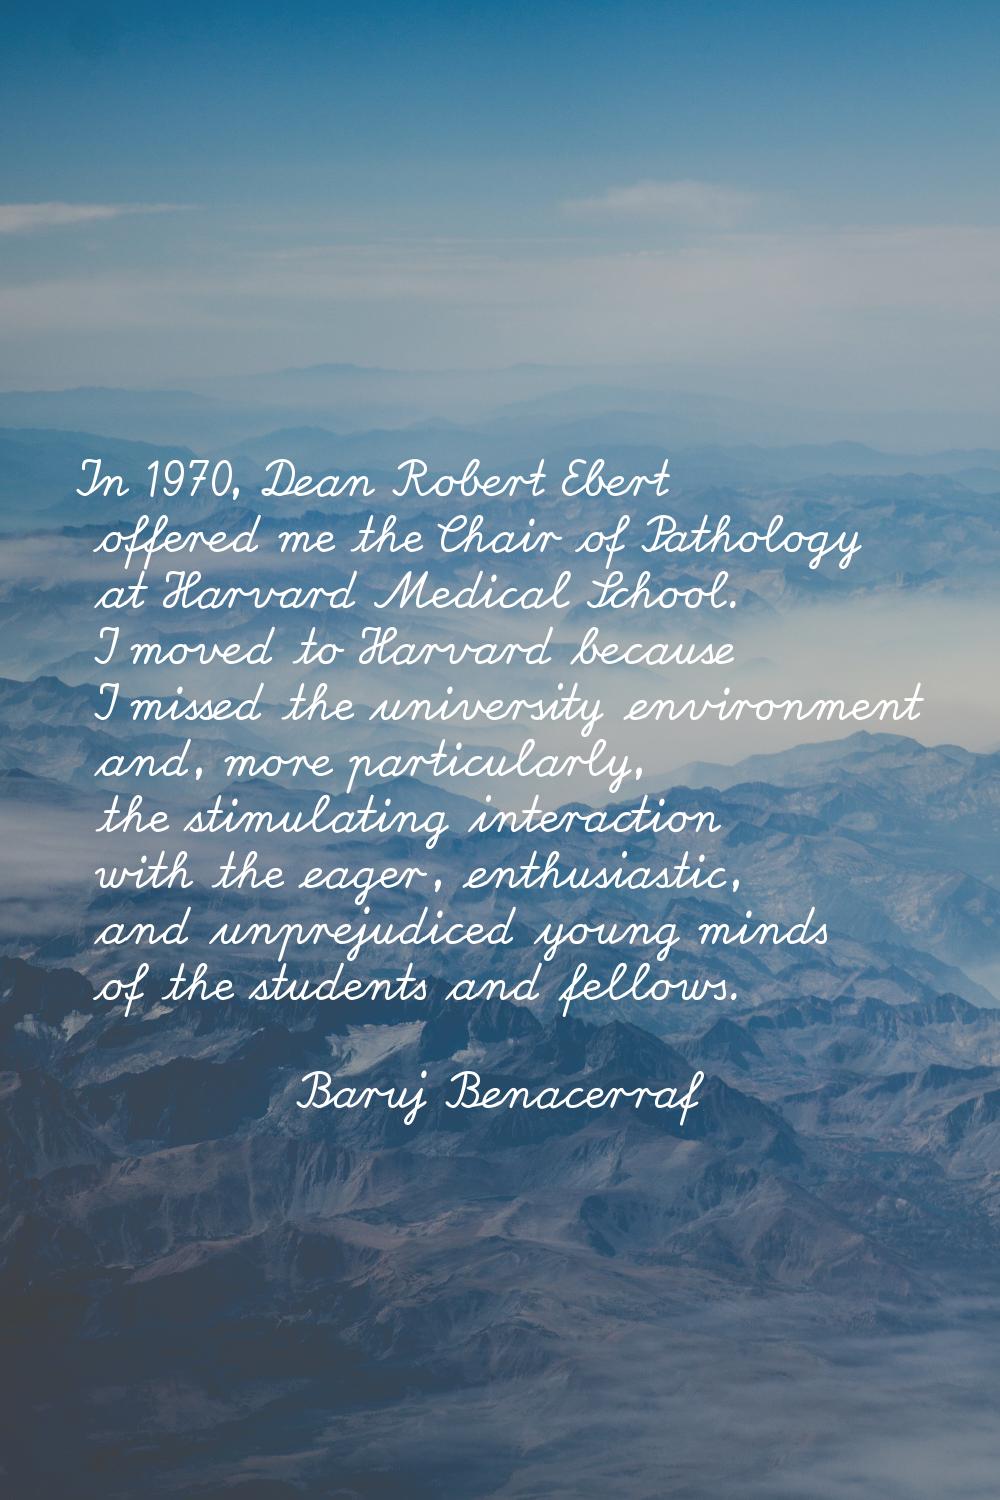 In 1970, Dean Robert Ebert offered me the Chair of Pathology at Harvard Medical School. I moved to 